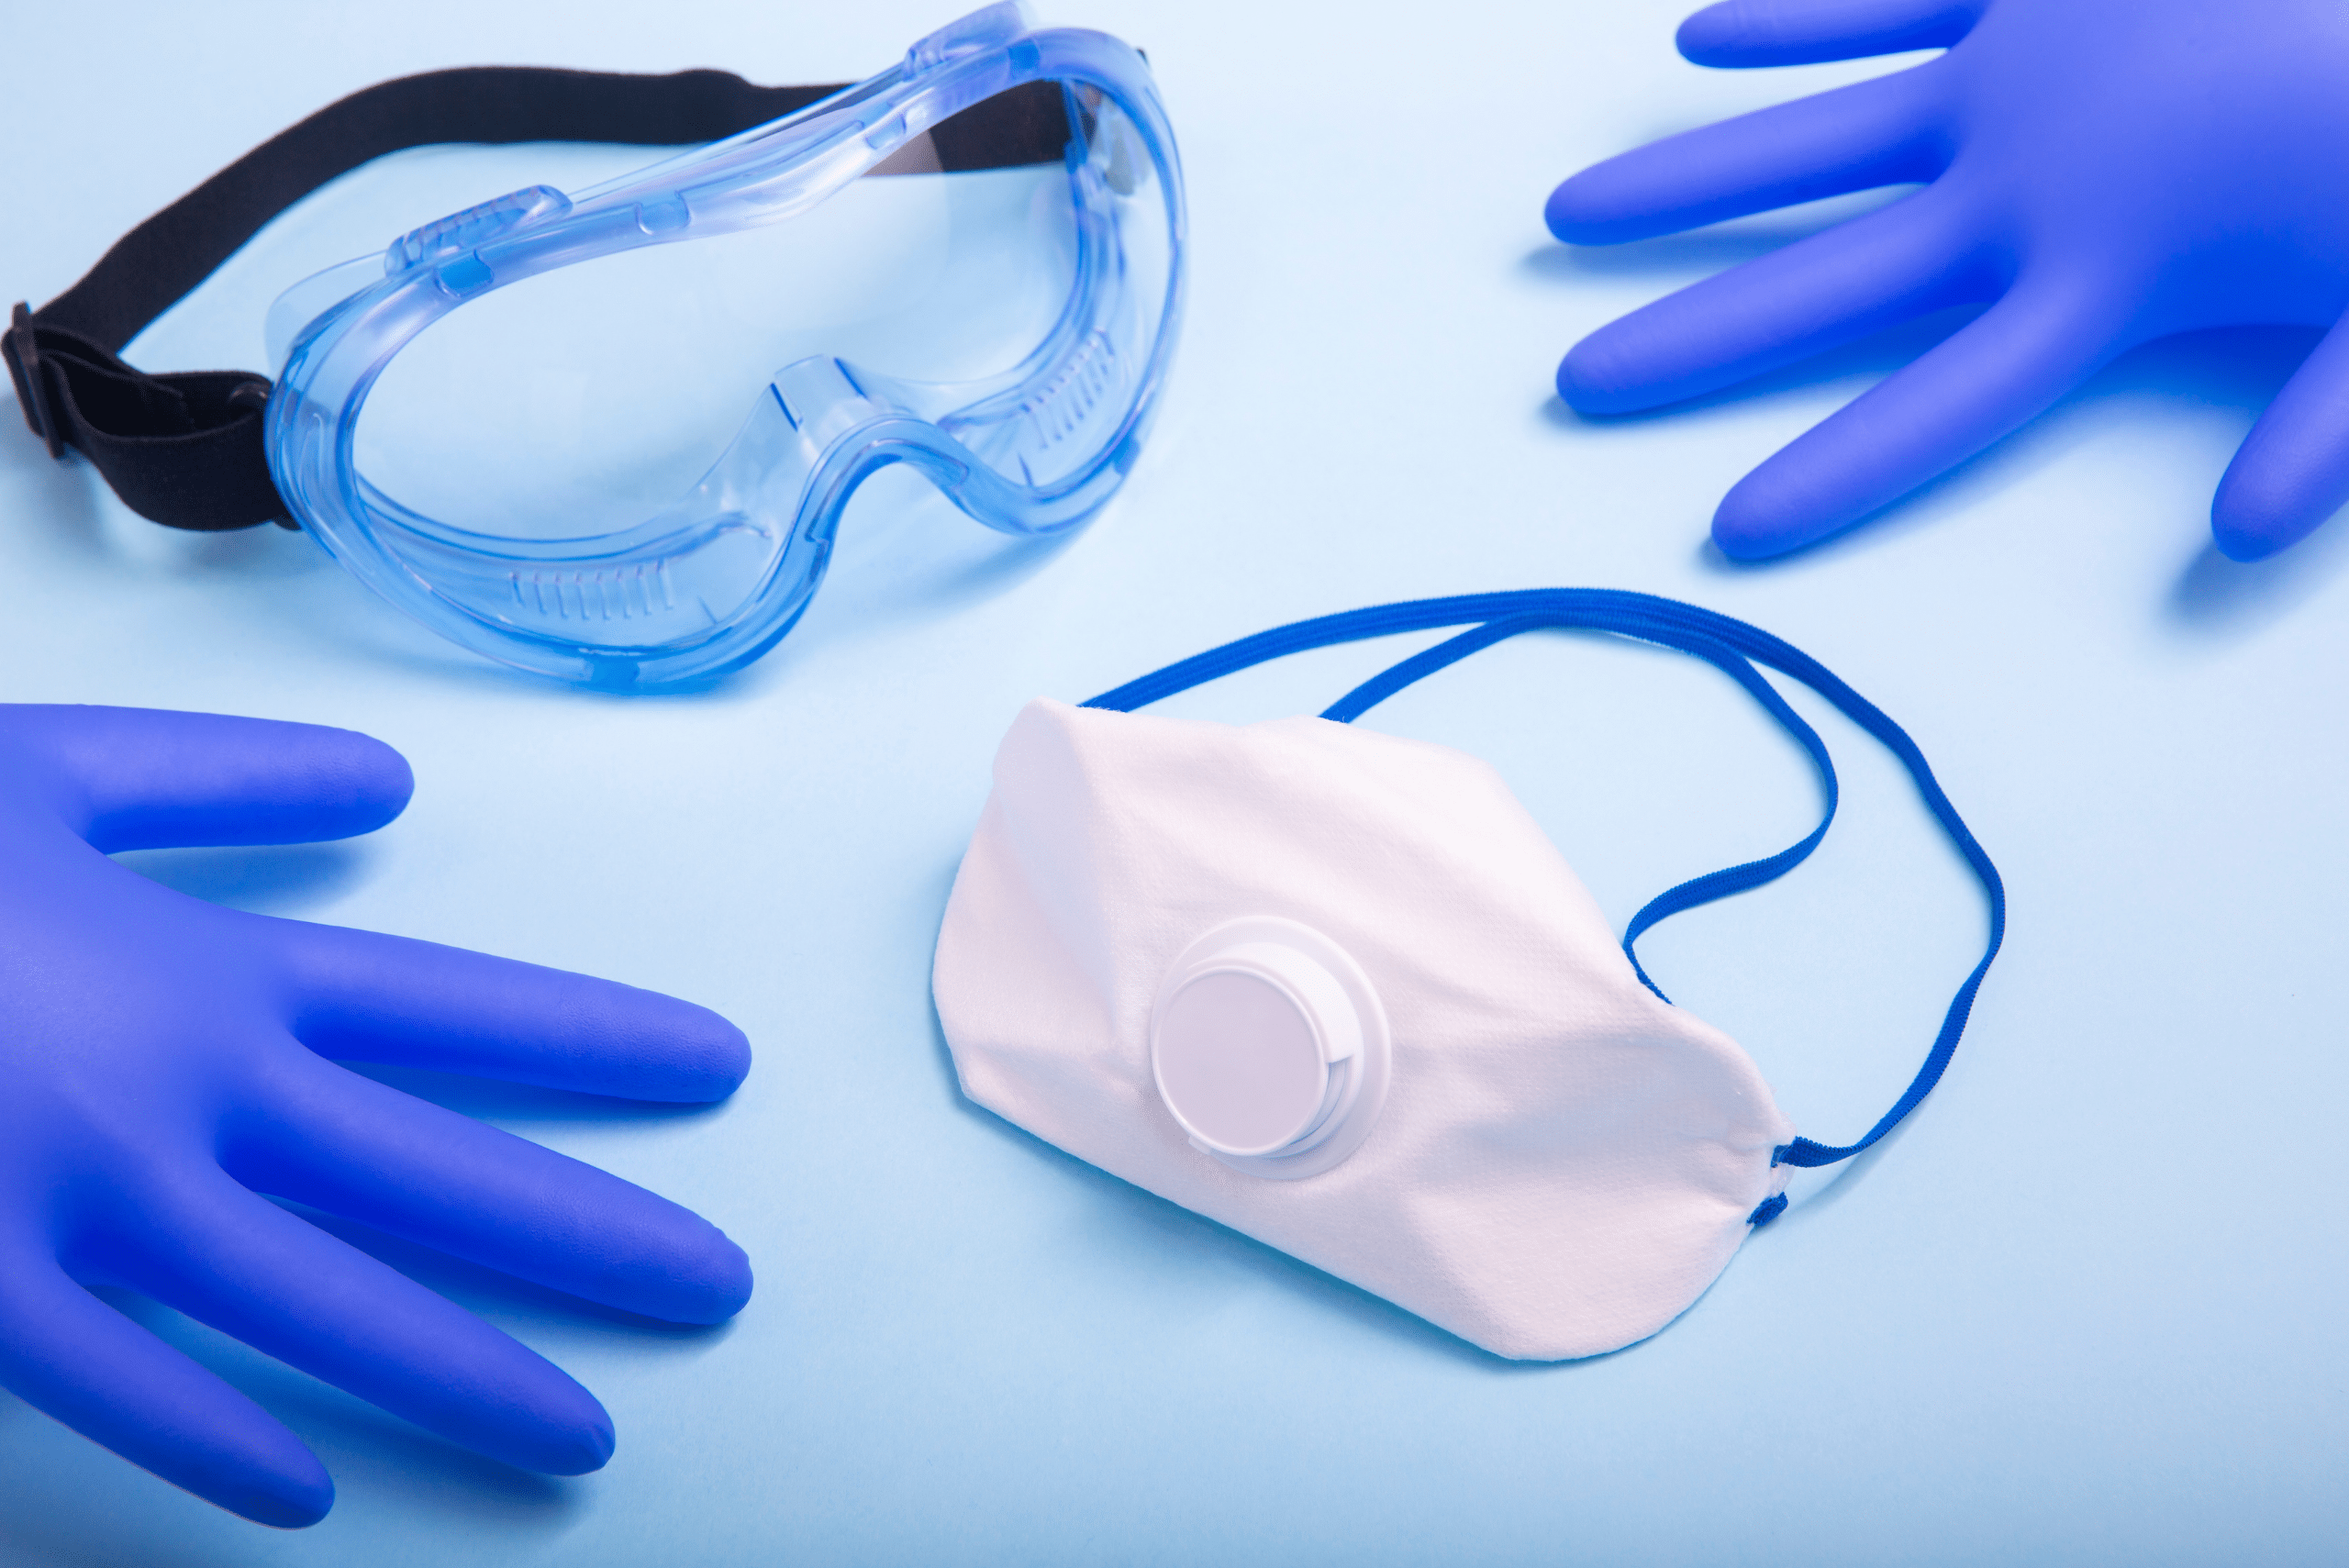 Protective equipment on a blue background.